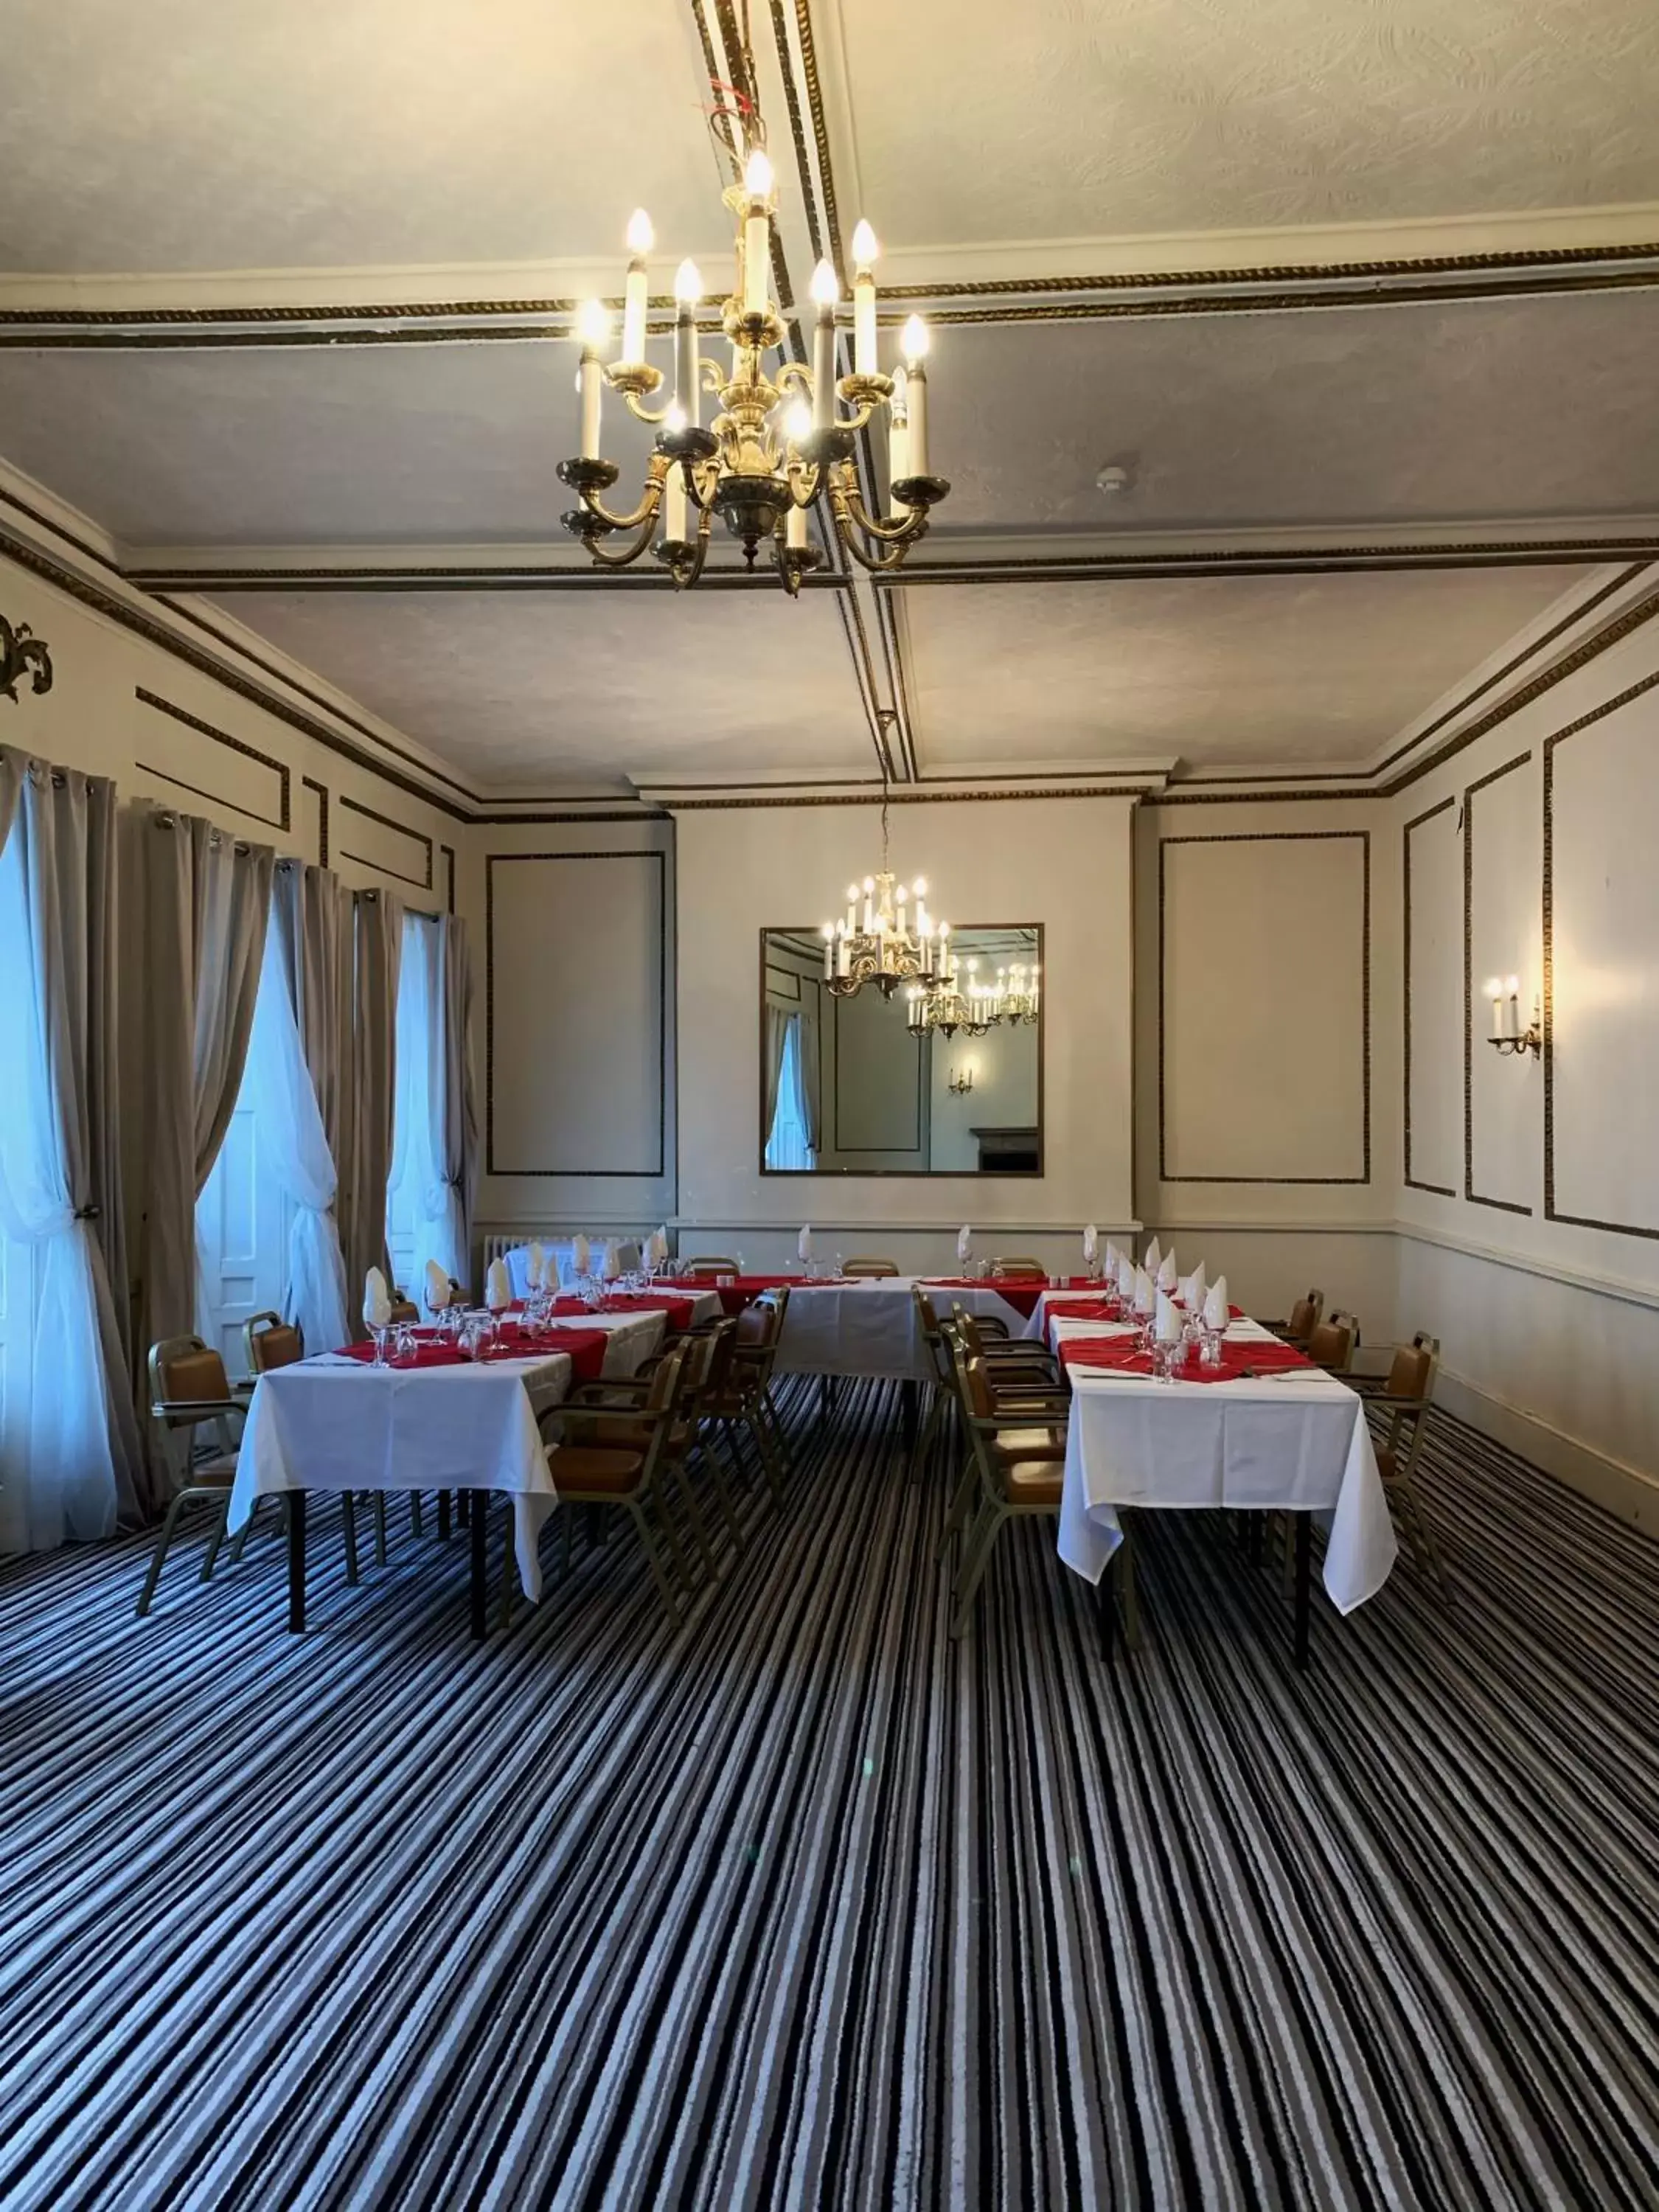 Banquet Facilities in The Star Hotel